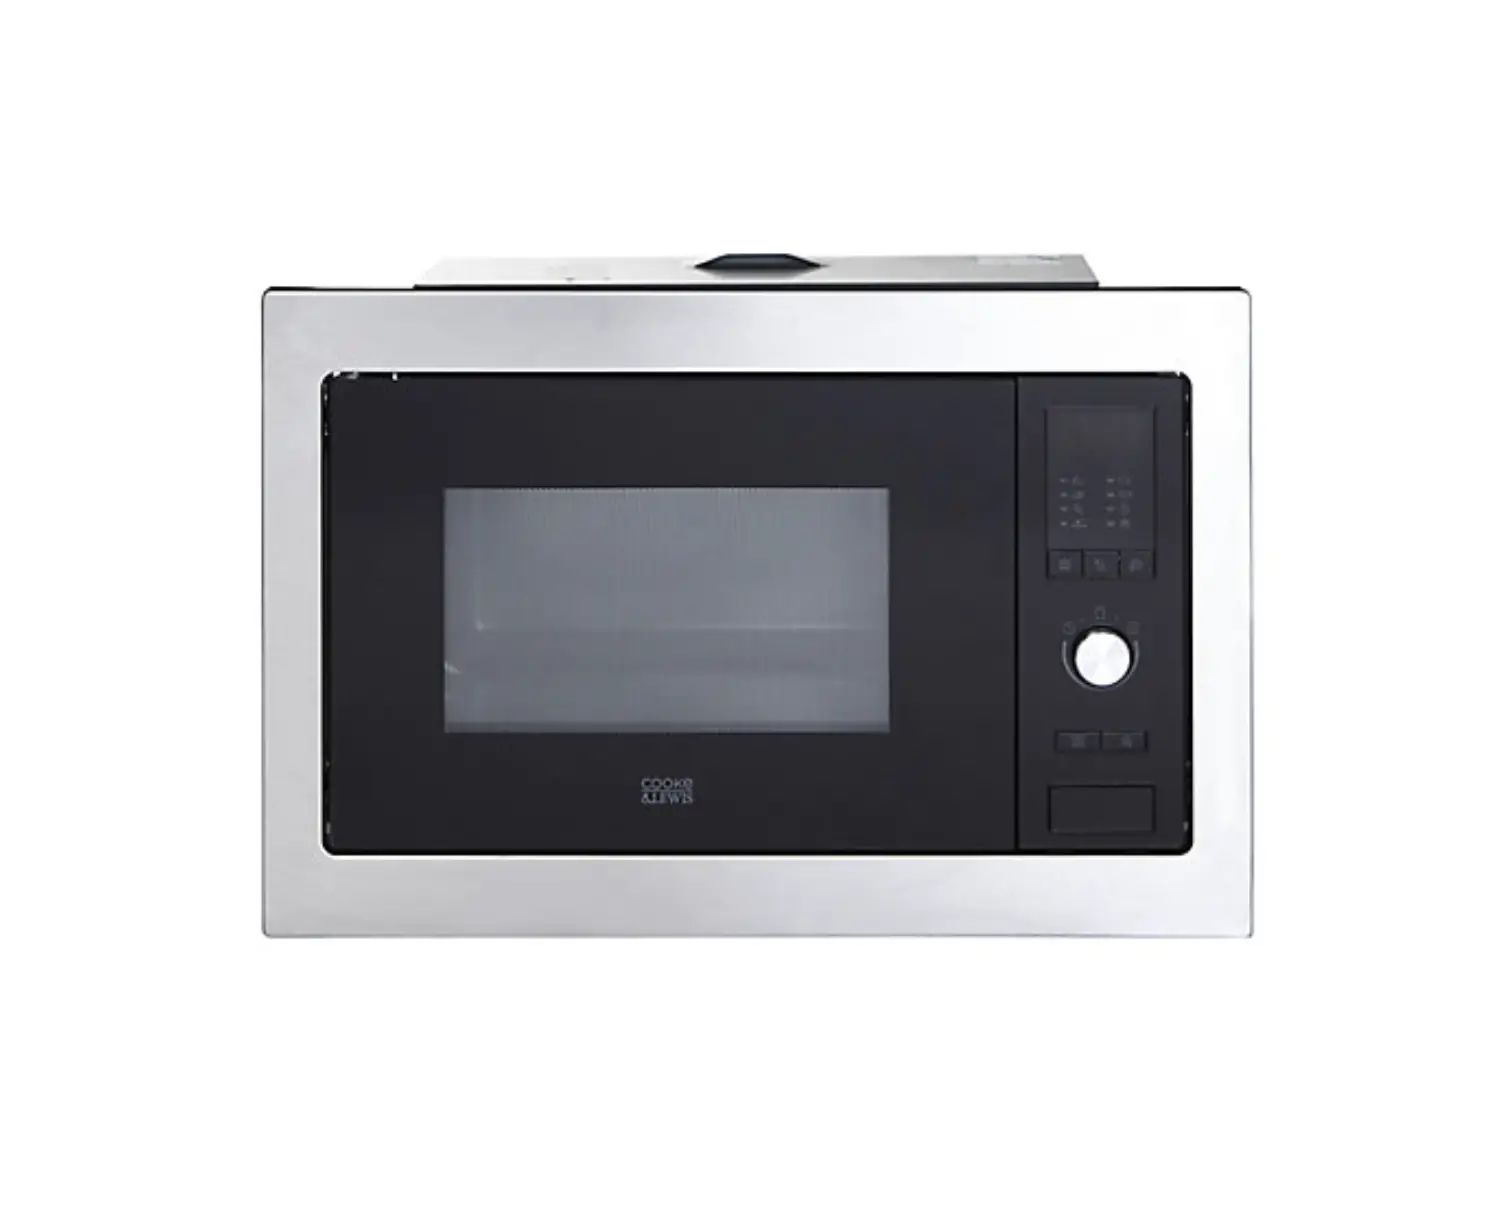 CLBIMW25LUK Glass and Stainless Steel Built-In Single Multifunction Oven